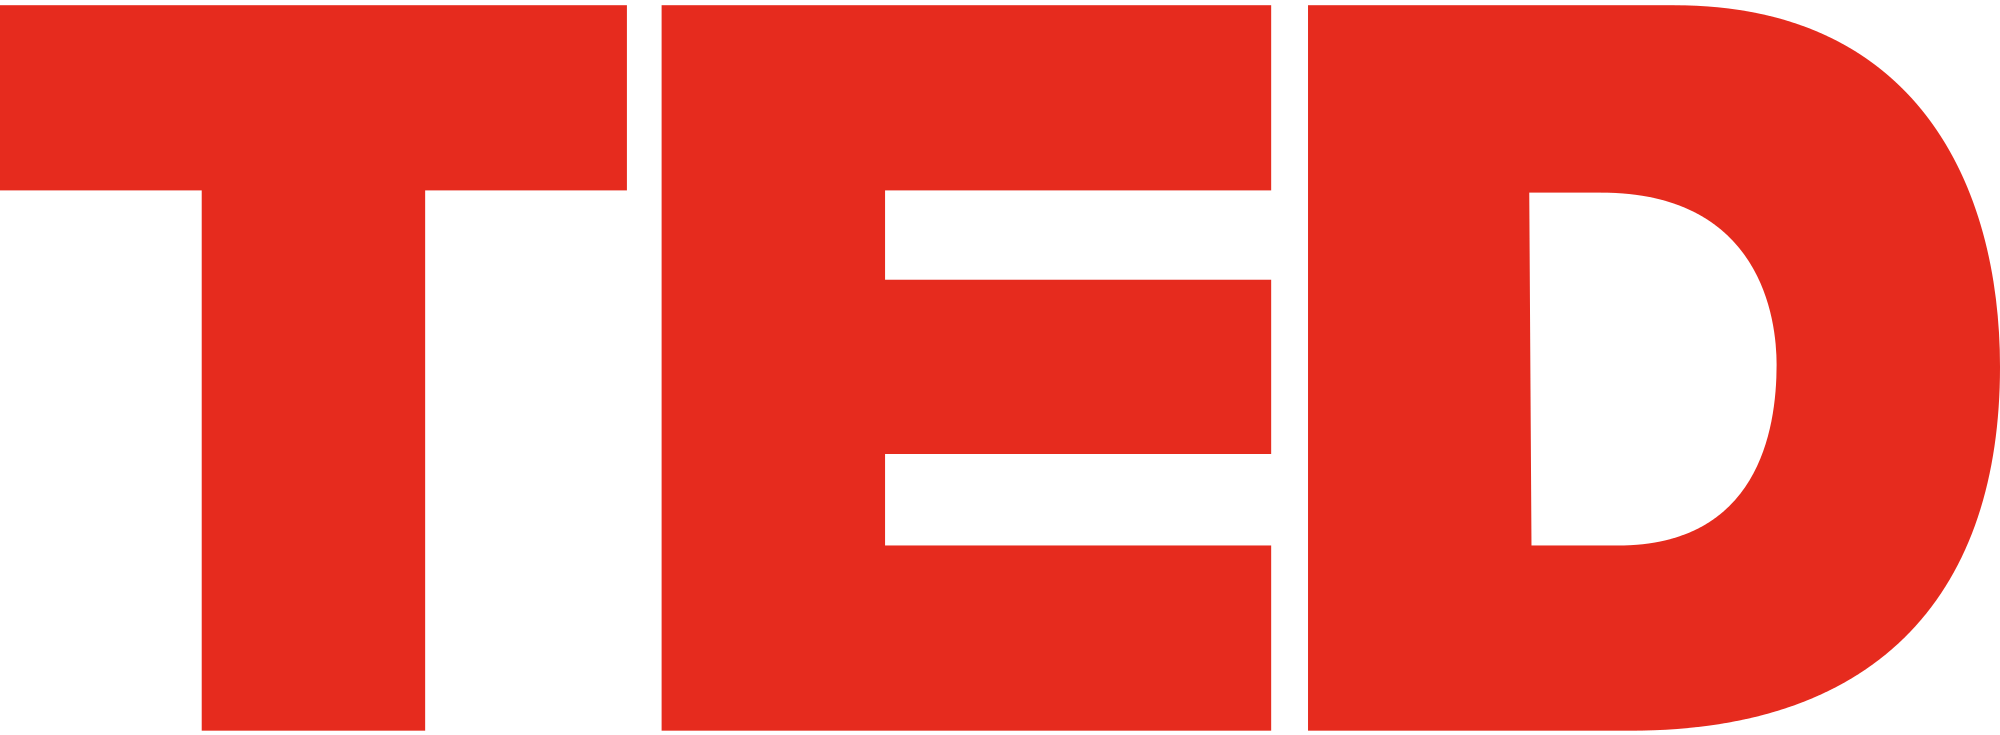 TED Talks Logo - File:TED three letter logo.svg - Wikimedia Commons